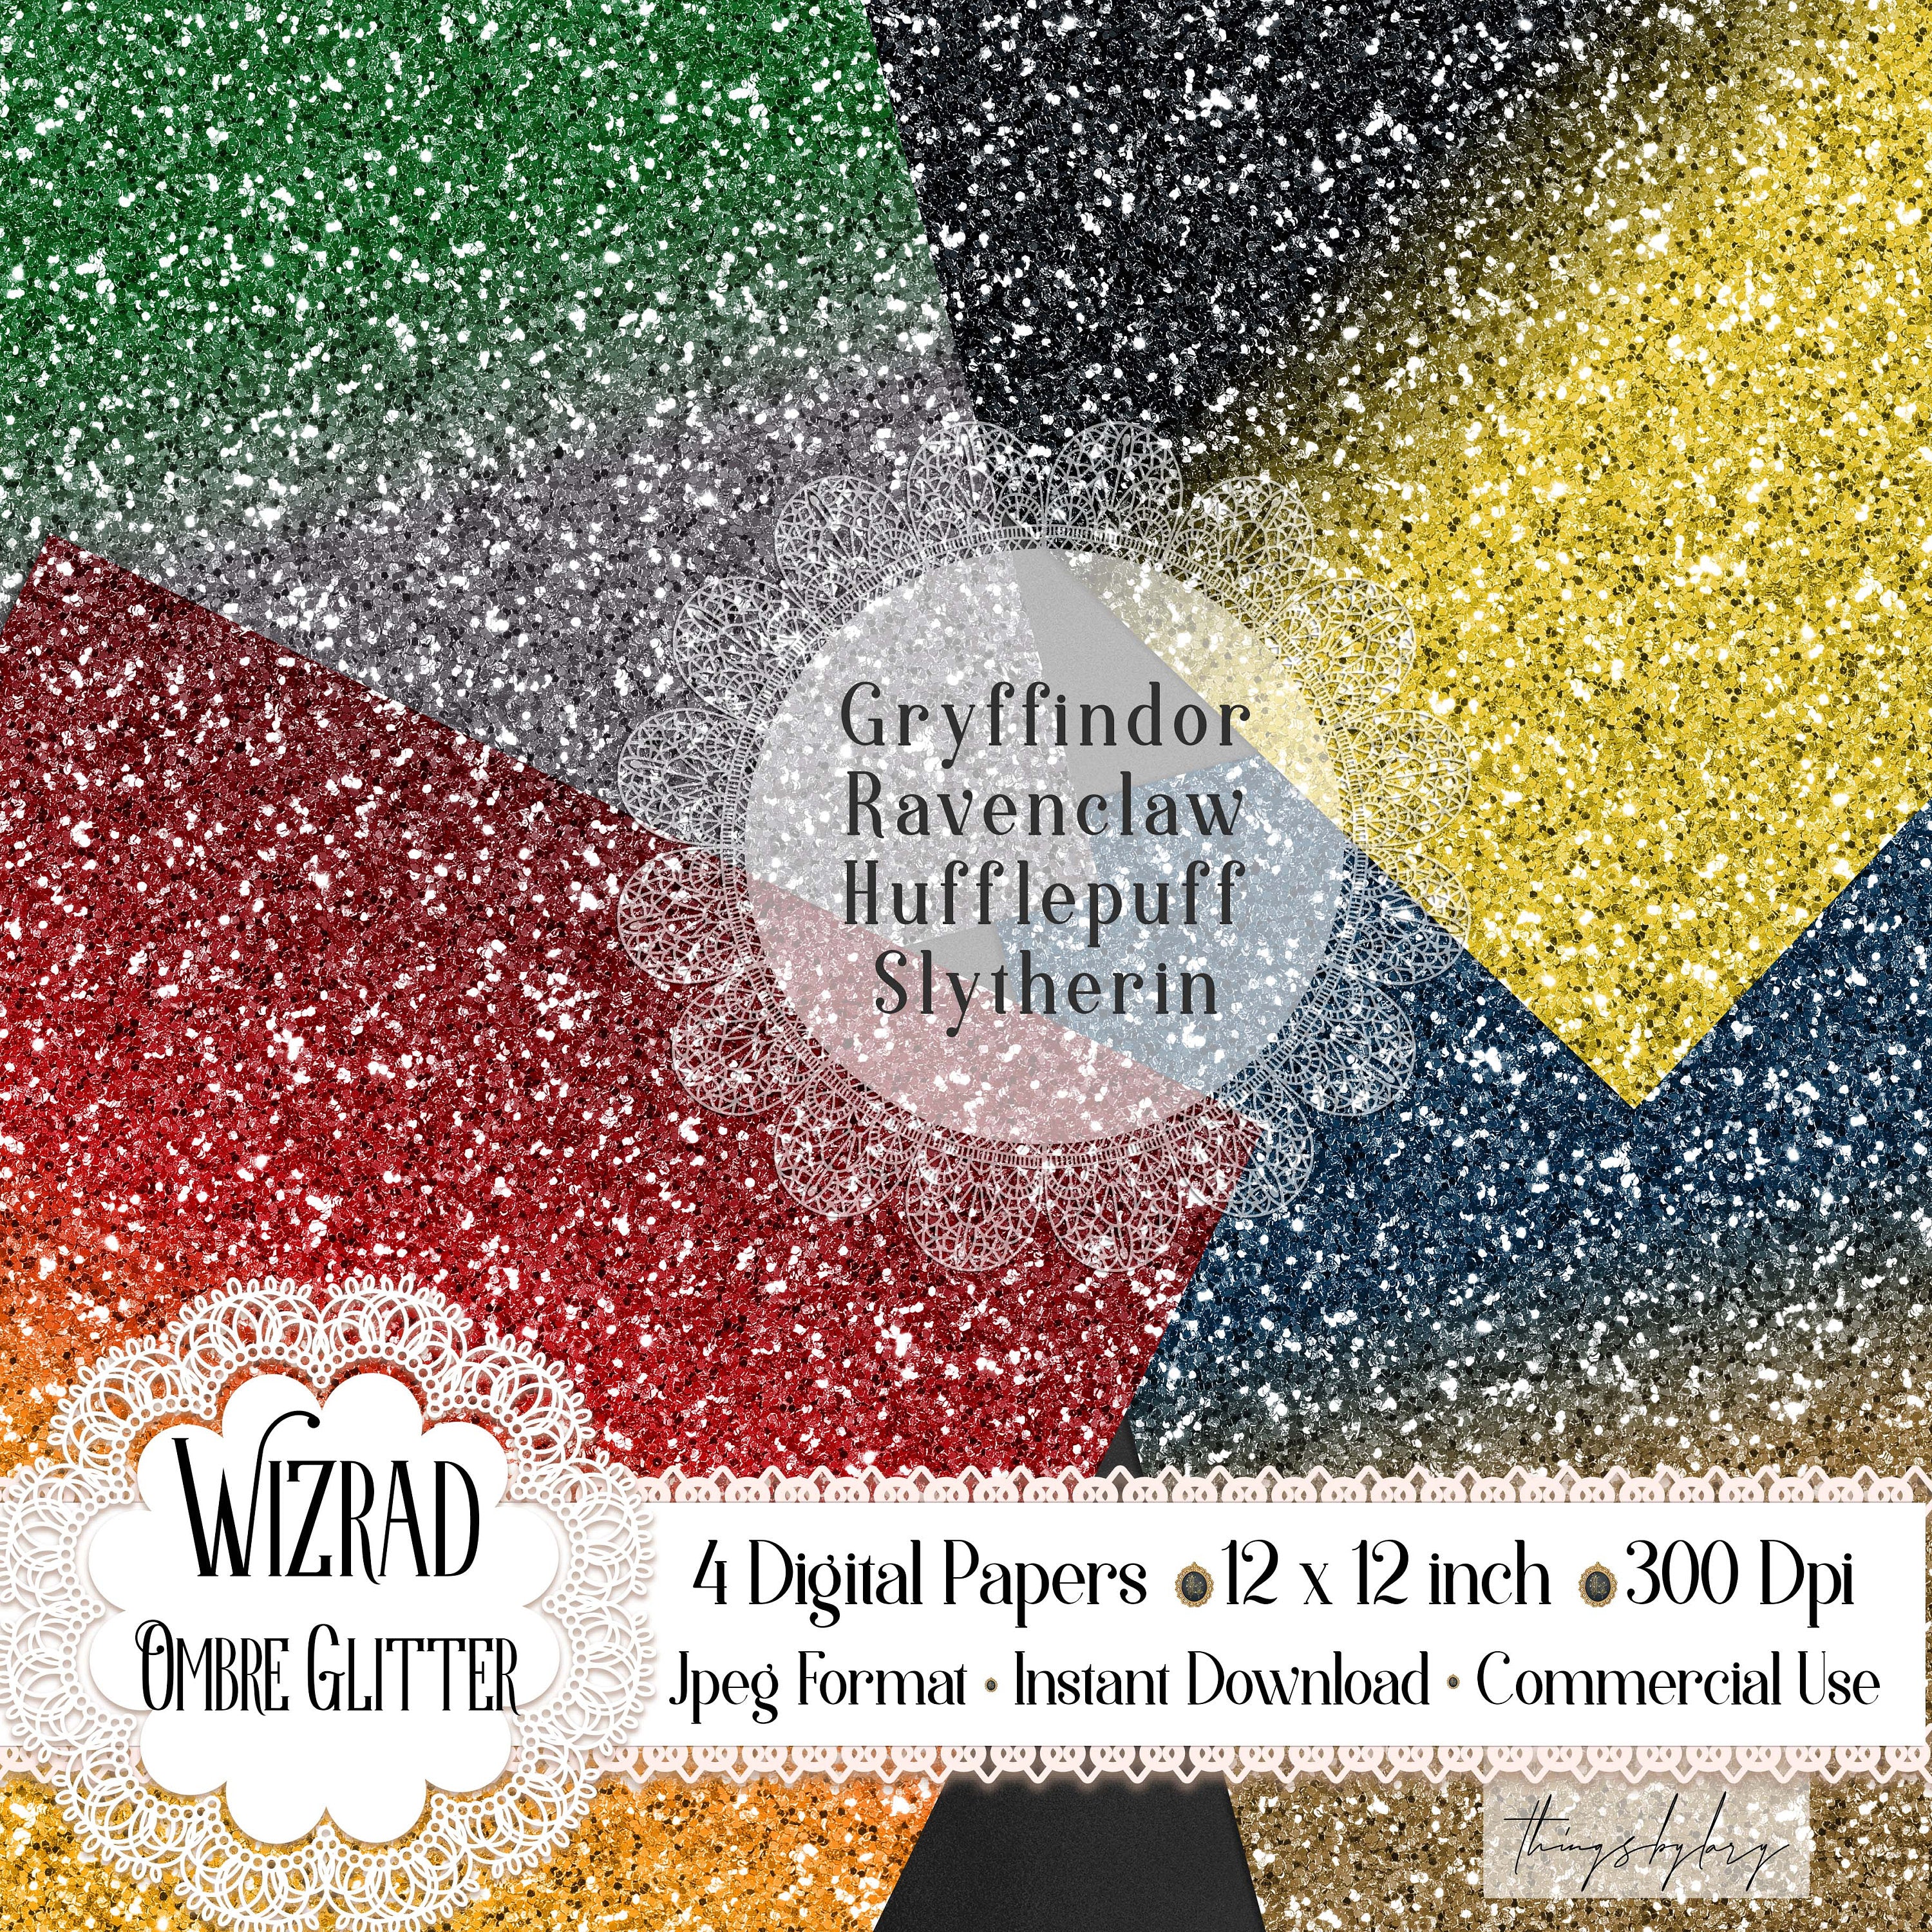 4 Wizard Gradient Ombre Glitter Digital Papers 12x12 inch 300 dpi commercial use instant download Gryffindor Ravenclaw Hufflepuff Slytherin